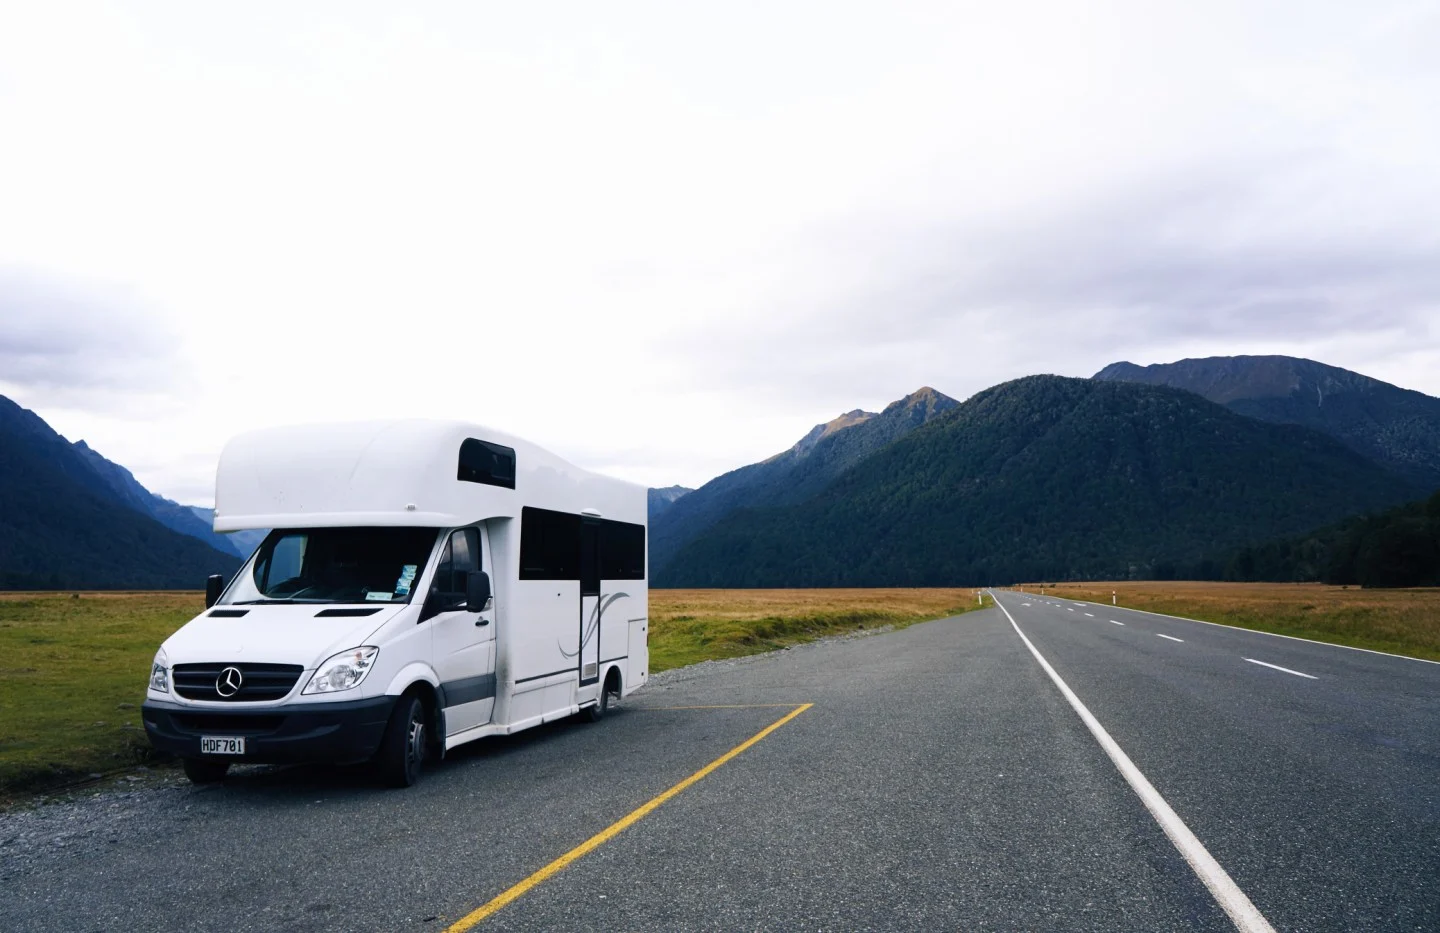 How much does an RV cost?